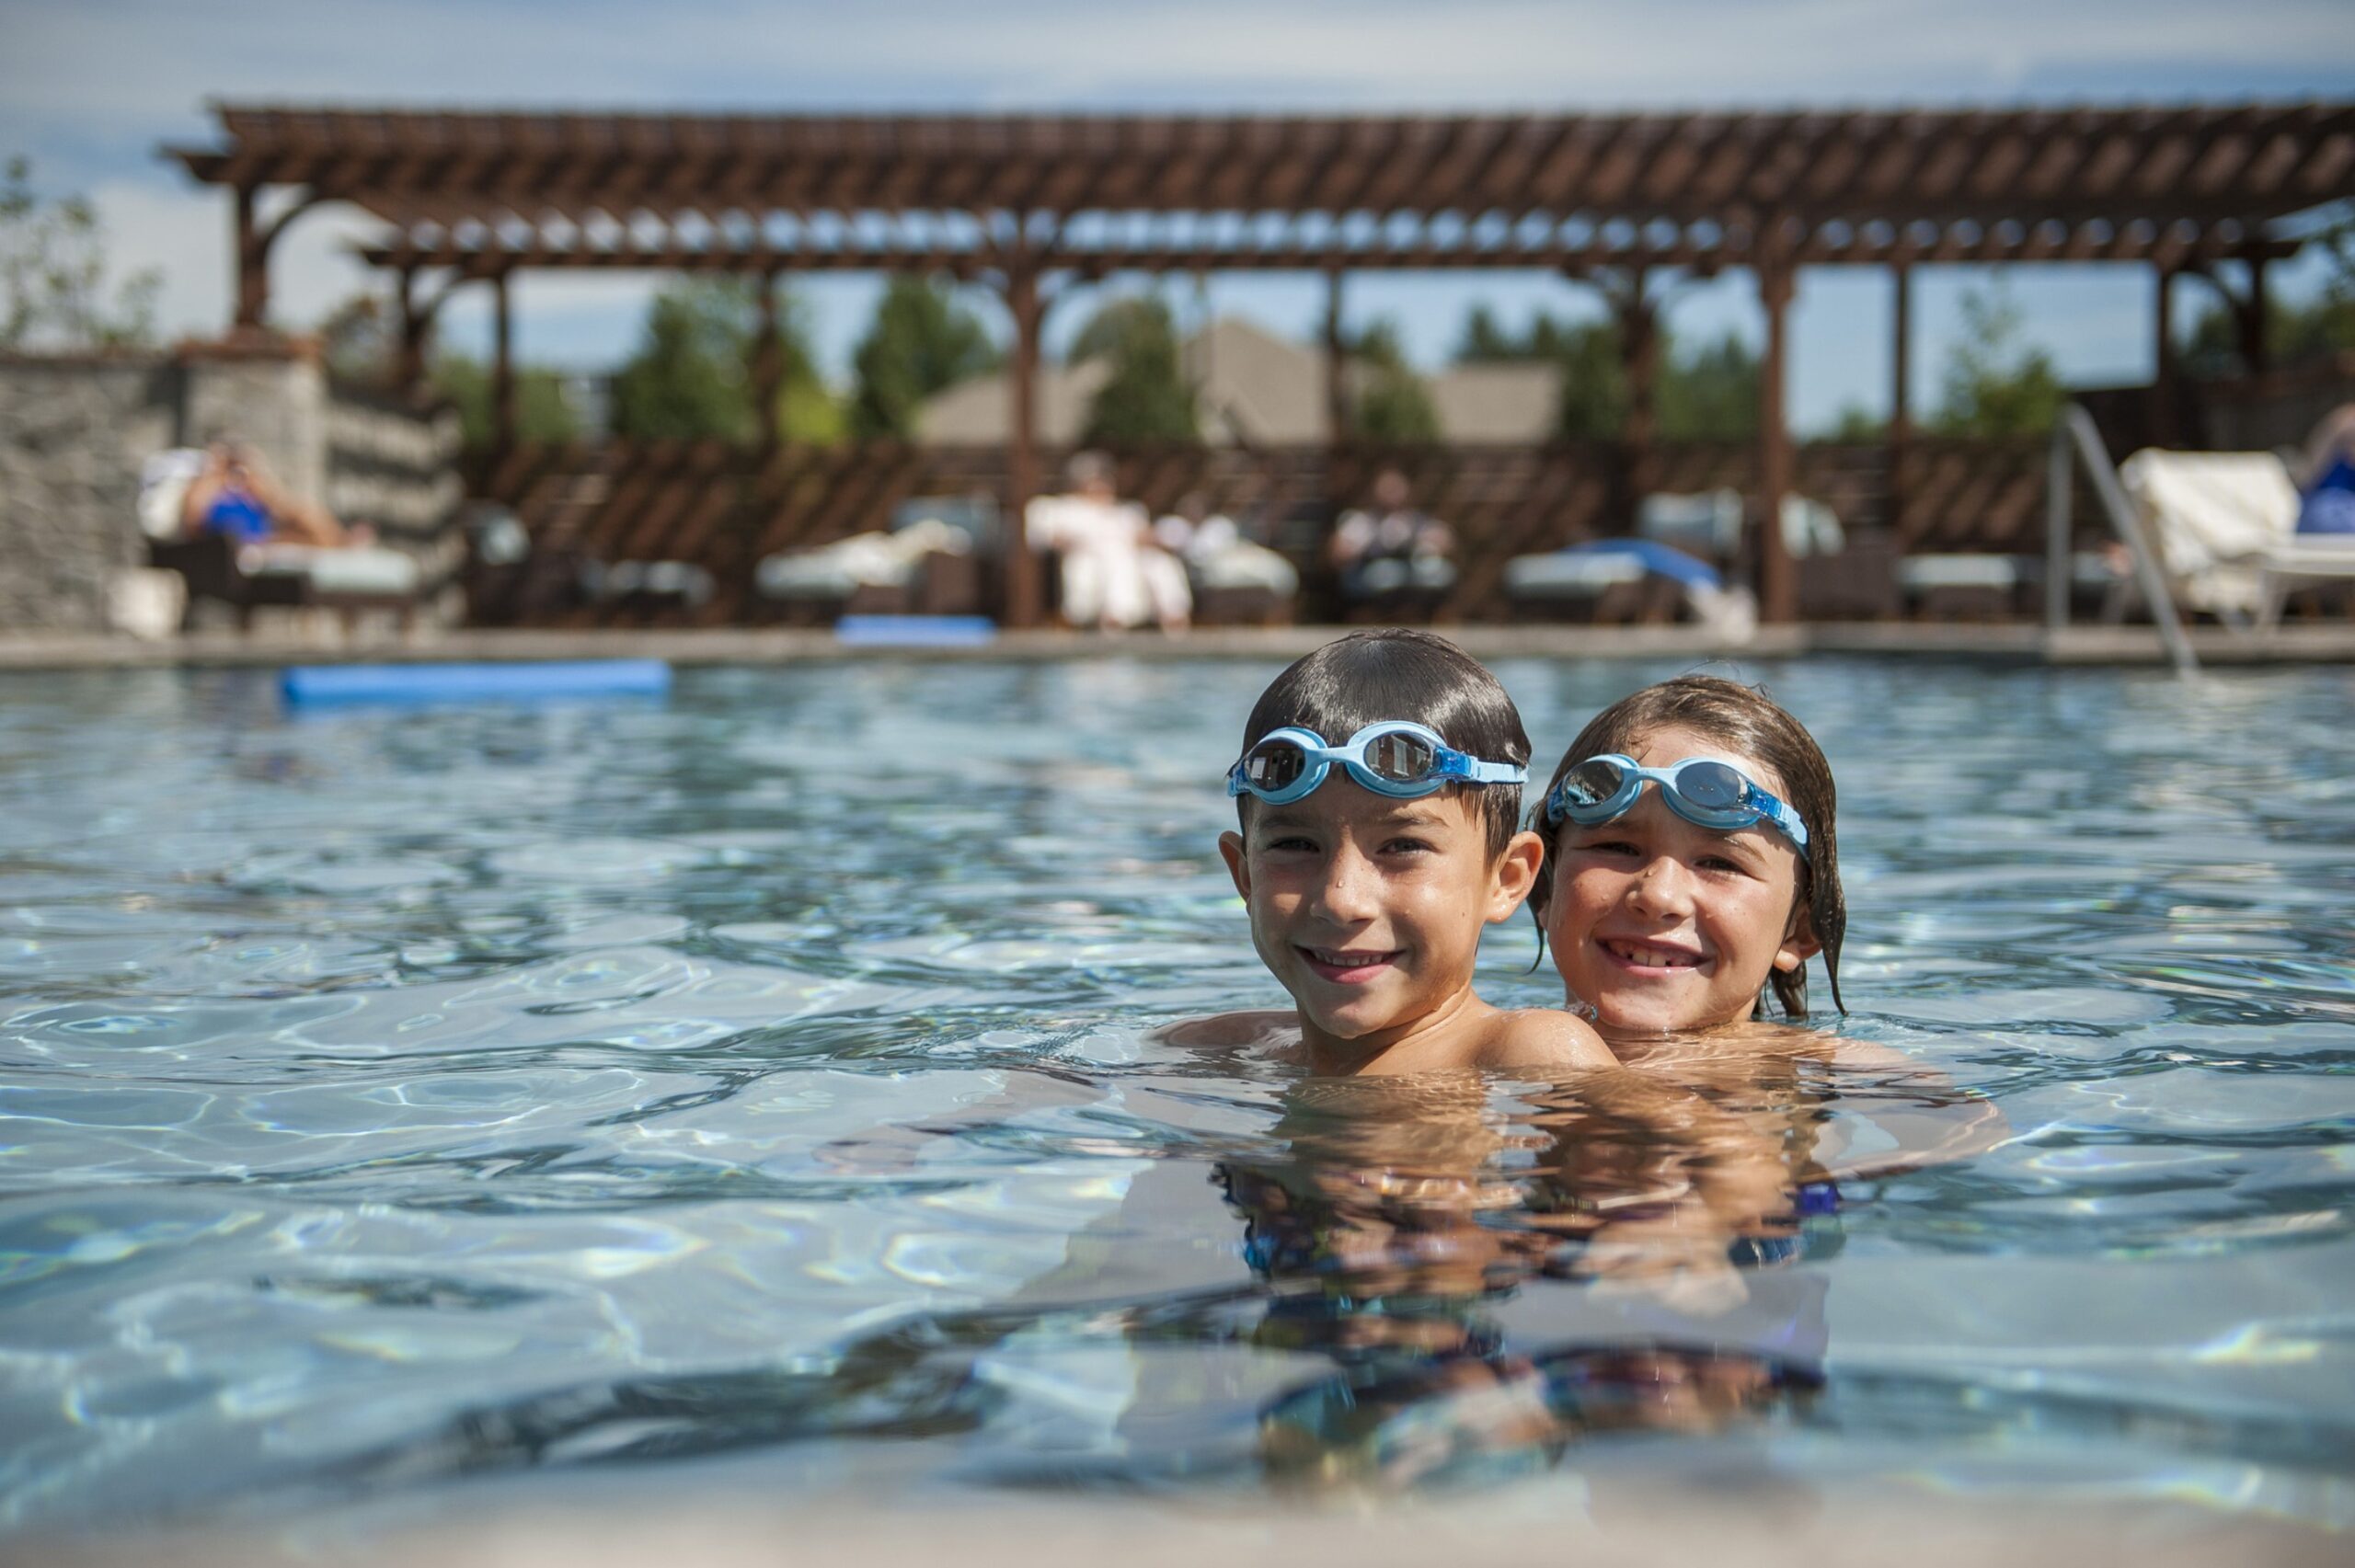 Two children wearing goggles in a swimming pool, enjoying the independence of swimming independently in a senior living community.